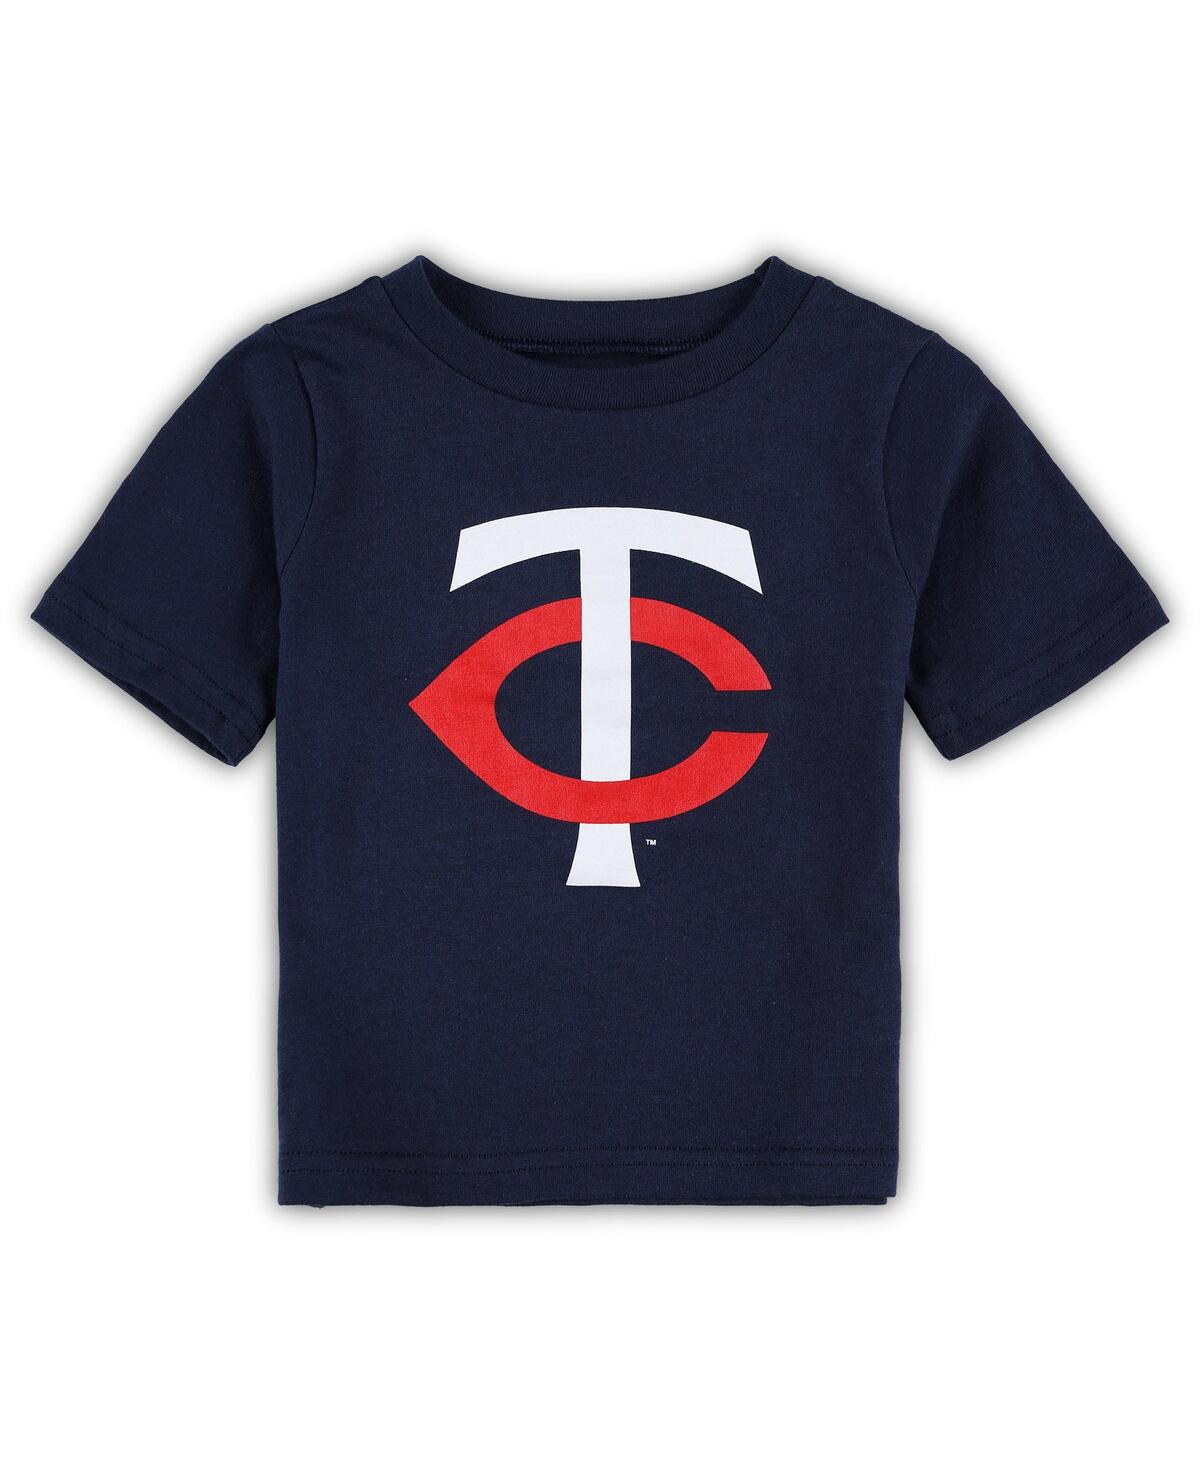 Outerstuff Babies' Toddler Boys And Girls Navy Minnesota Twins Team Crew Primary Logo T-shirt